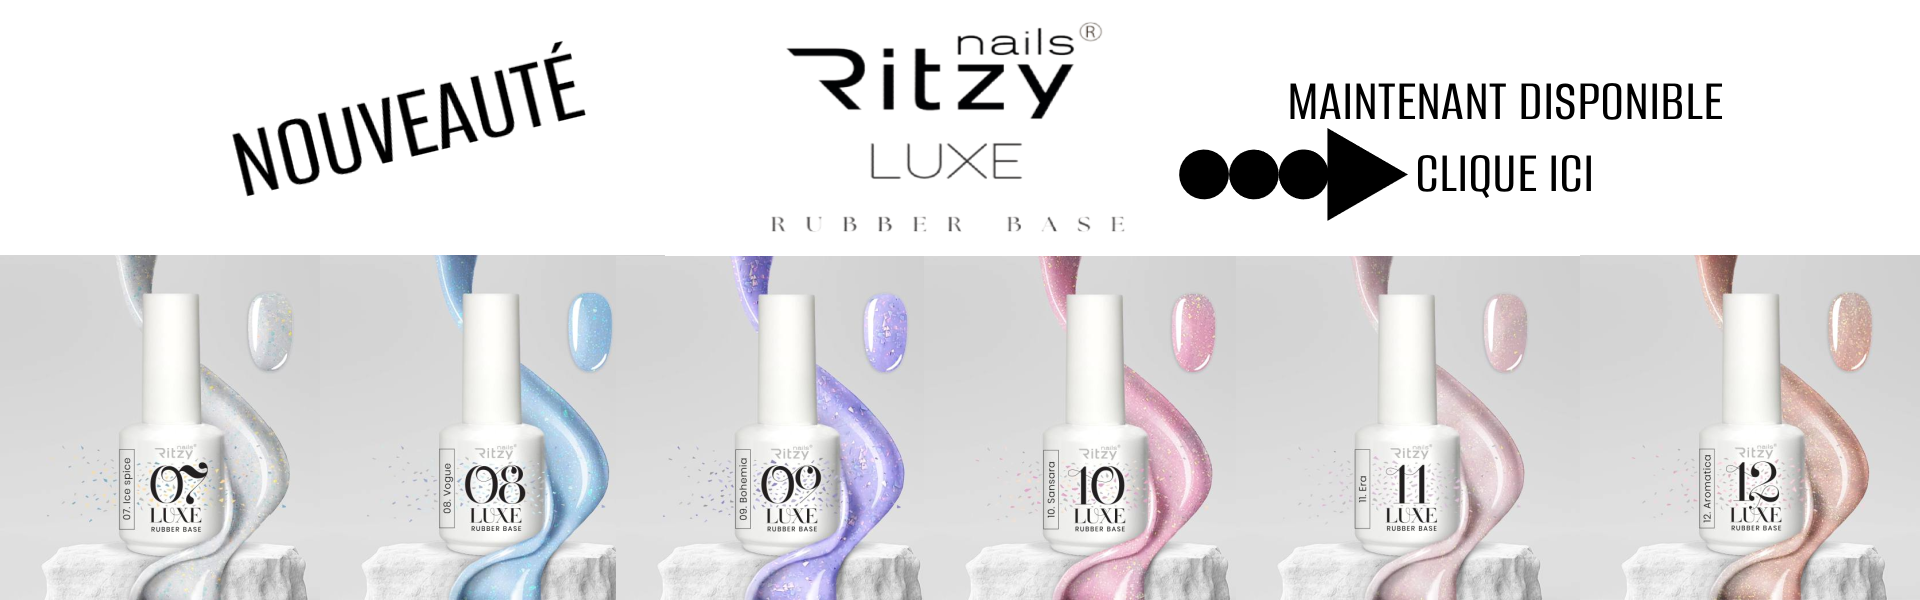 Rubber base Luxe Ritzy Nails